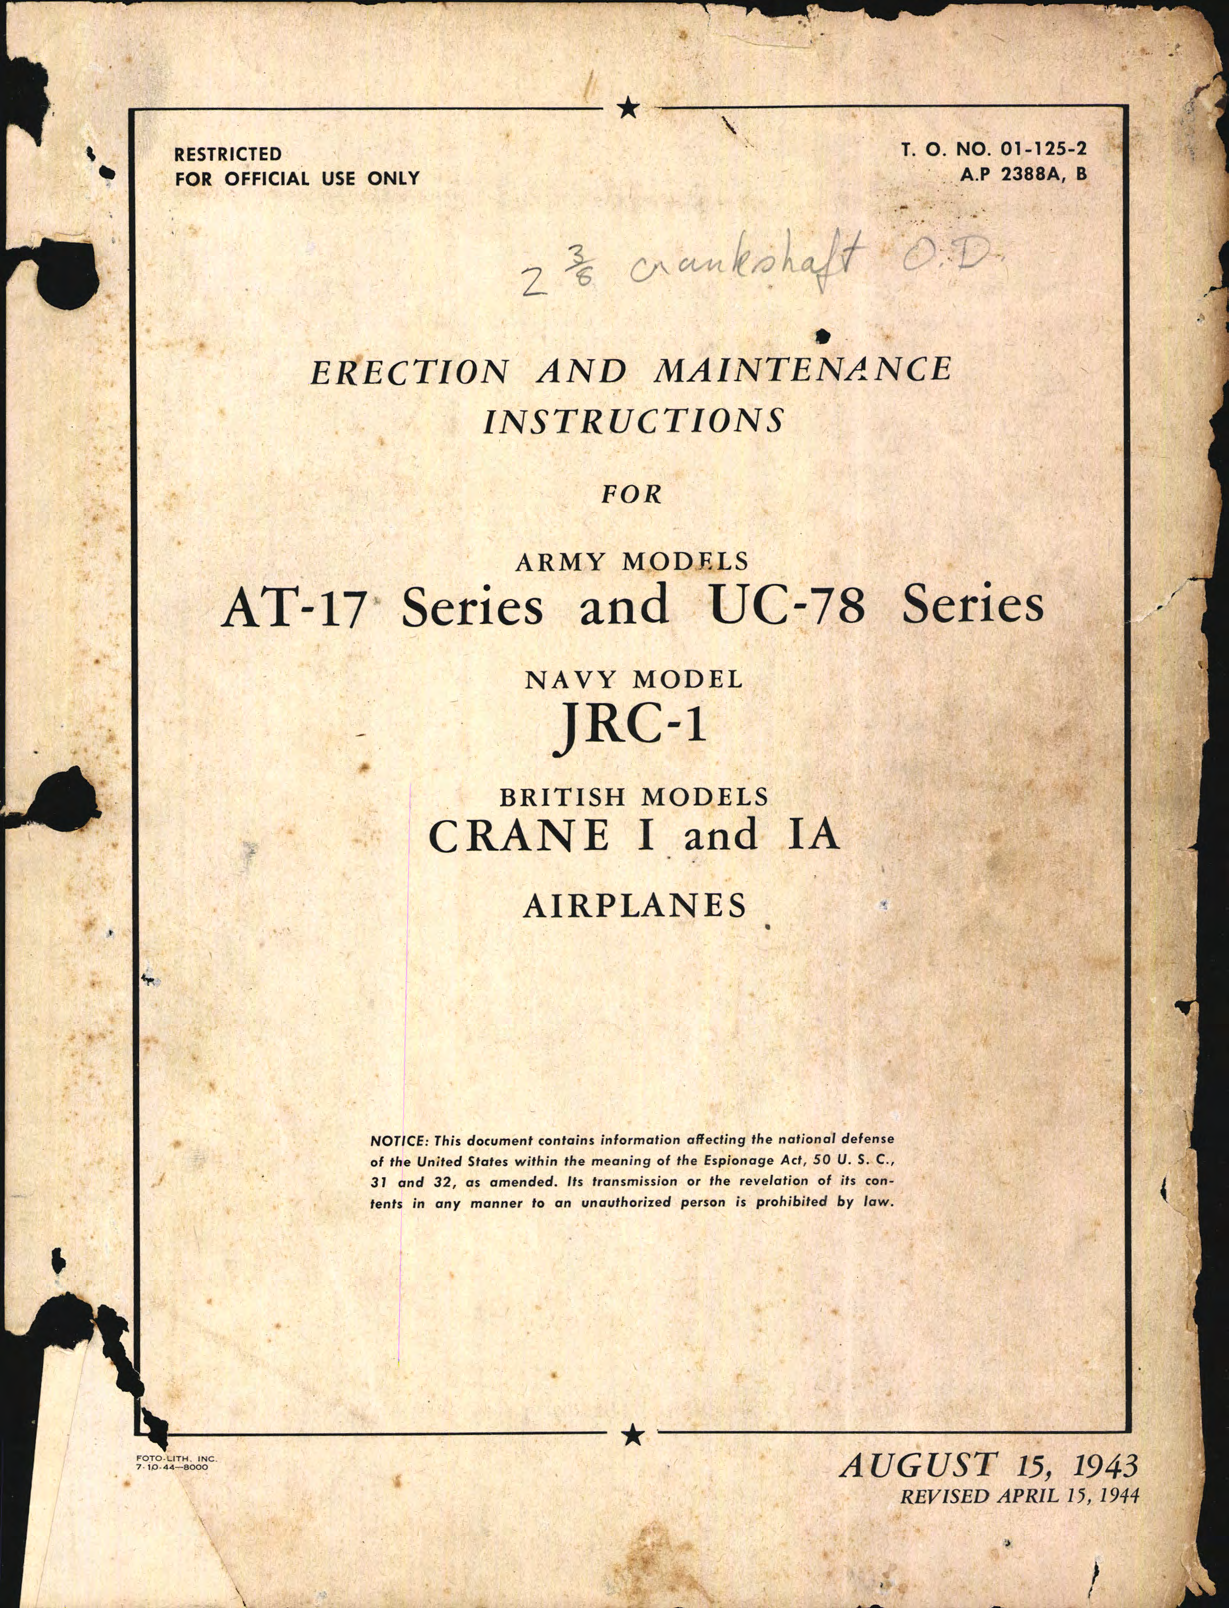 Sample page 1 from AirCorps Library document: Erection & Maintenance instructions for AT-17, UC-78, and JRC-1 Series (Crane I and IA)